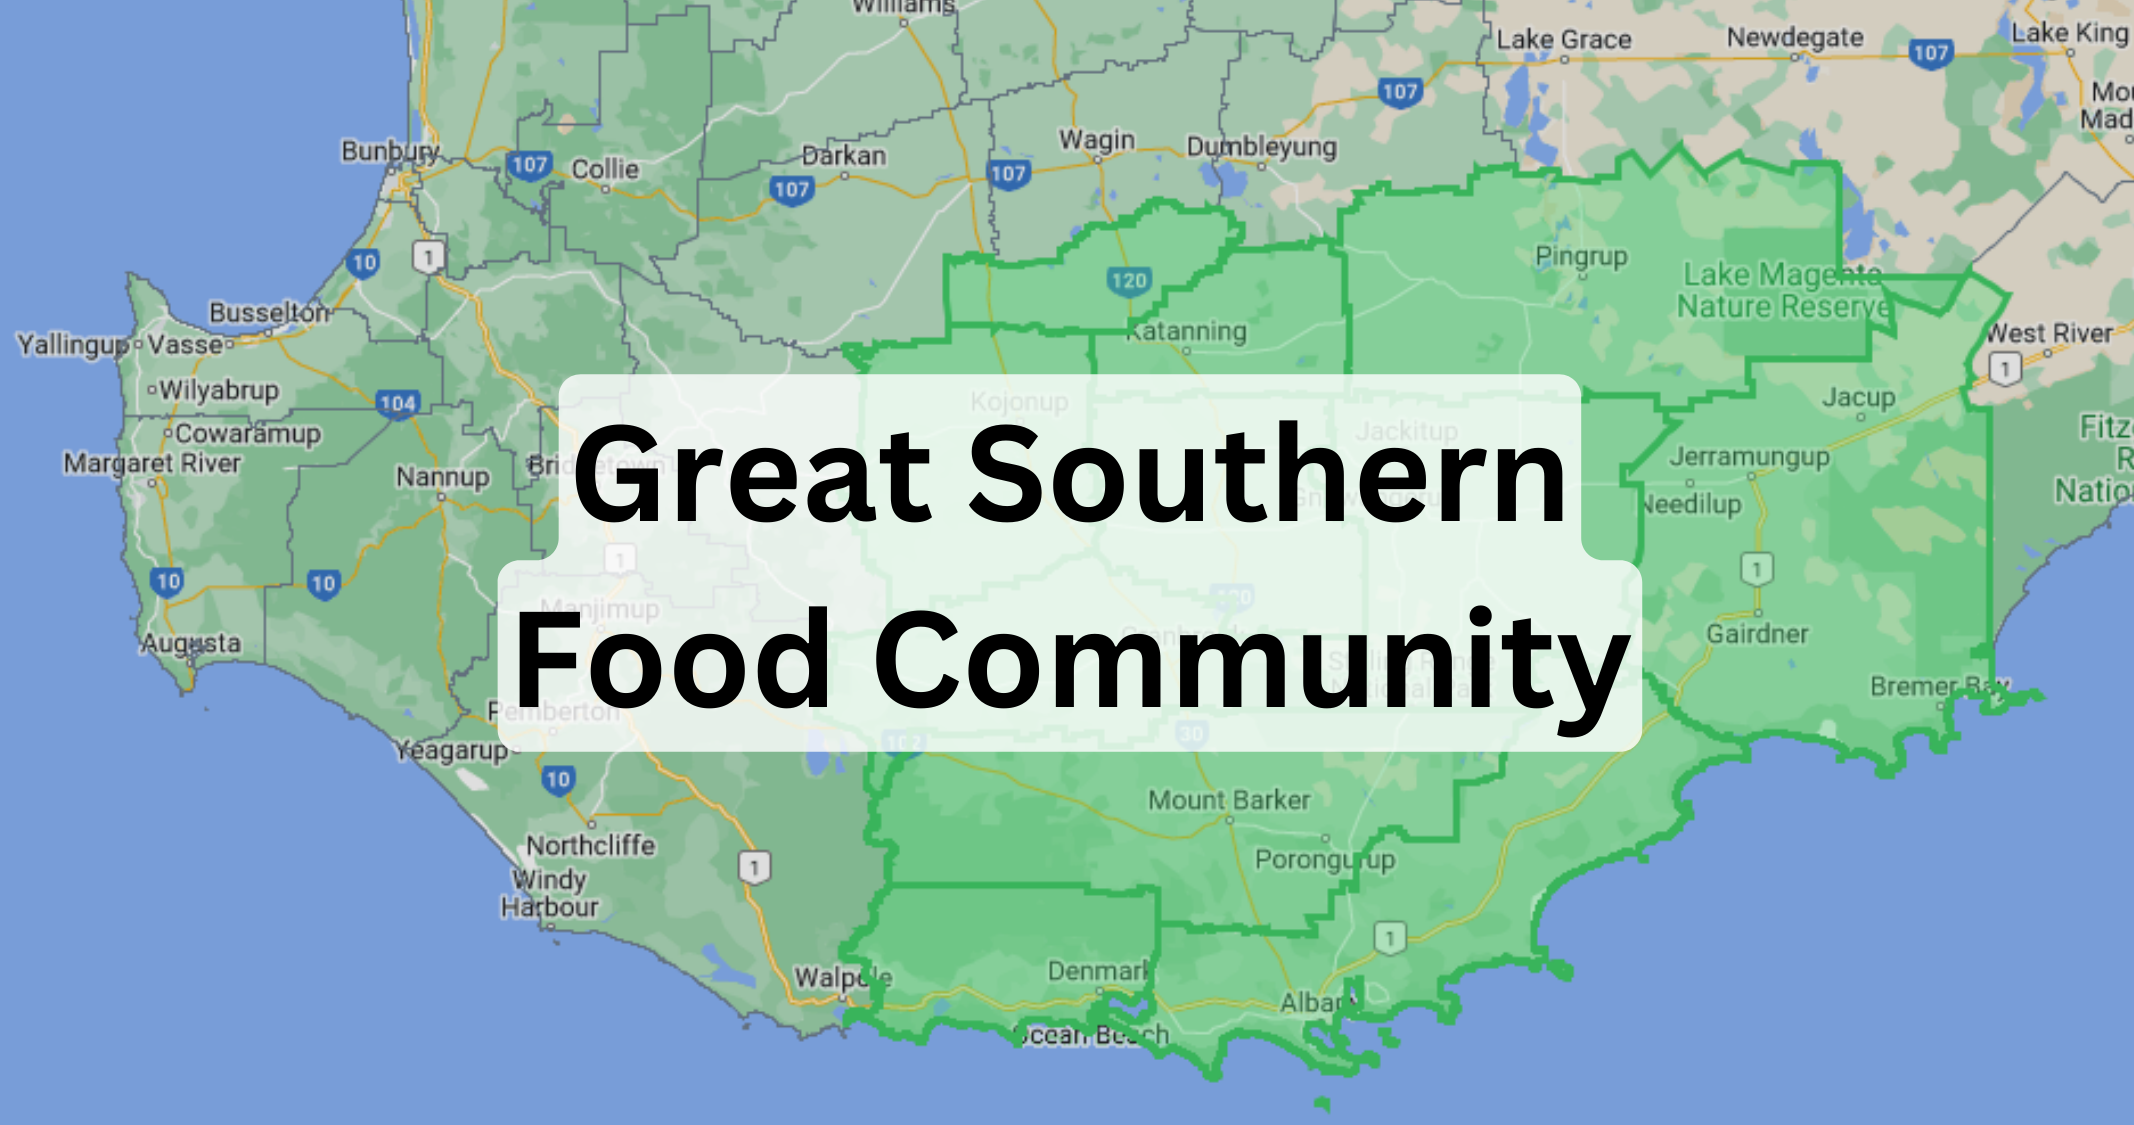 Great Southern Food Community